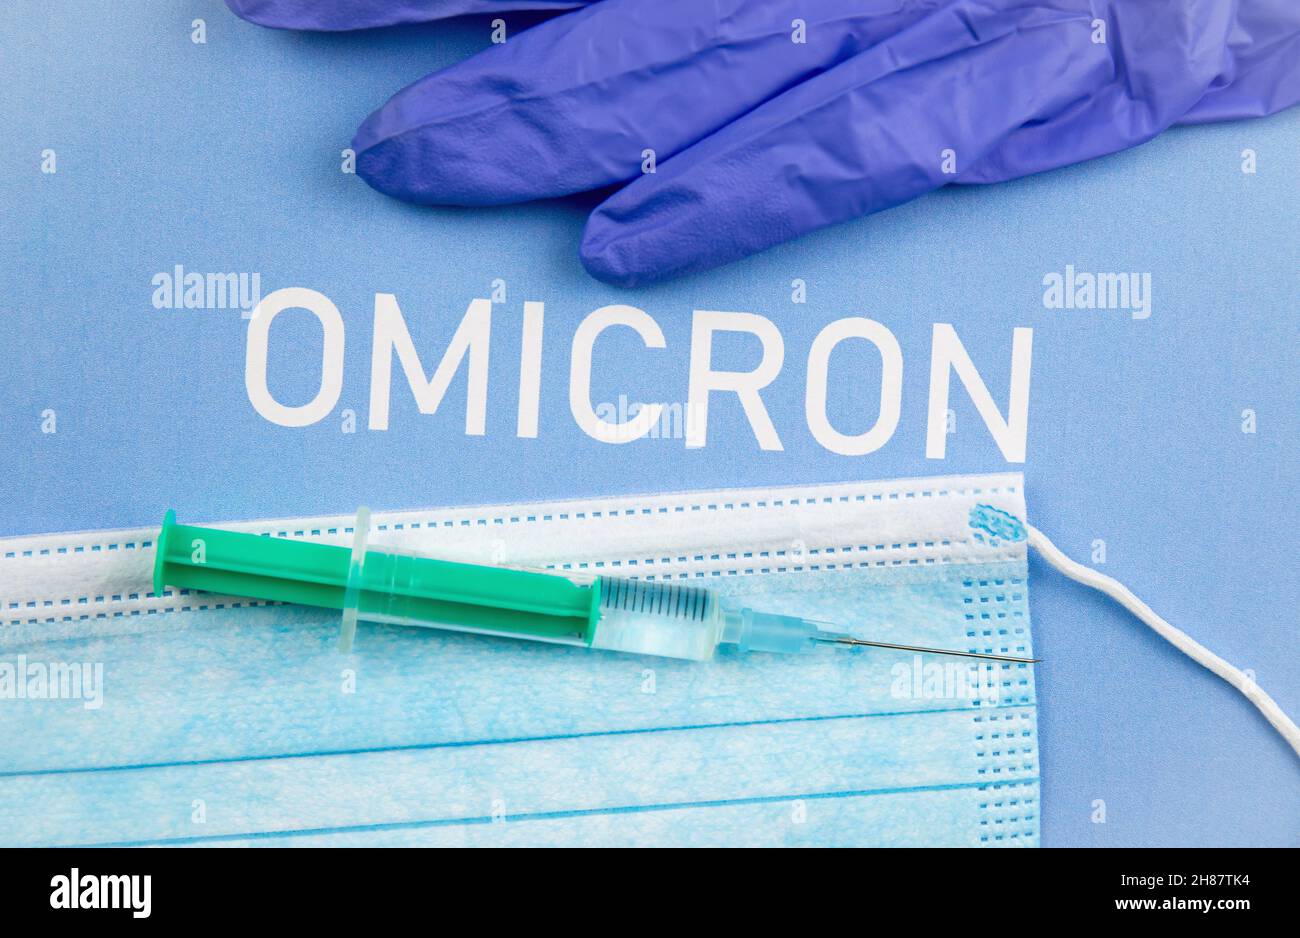 New Coronavirus Covid-19 mutation Omicron concept. Medical mask, syringe and text with letters Omicron. Stock Photo